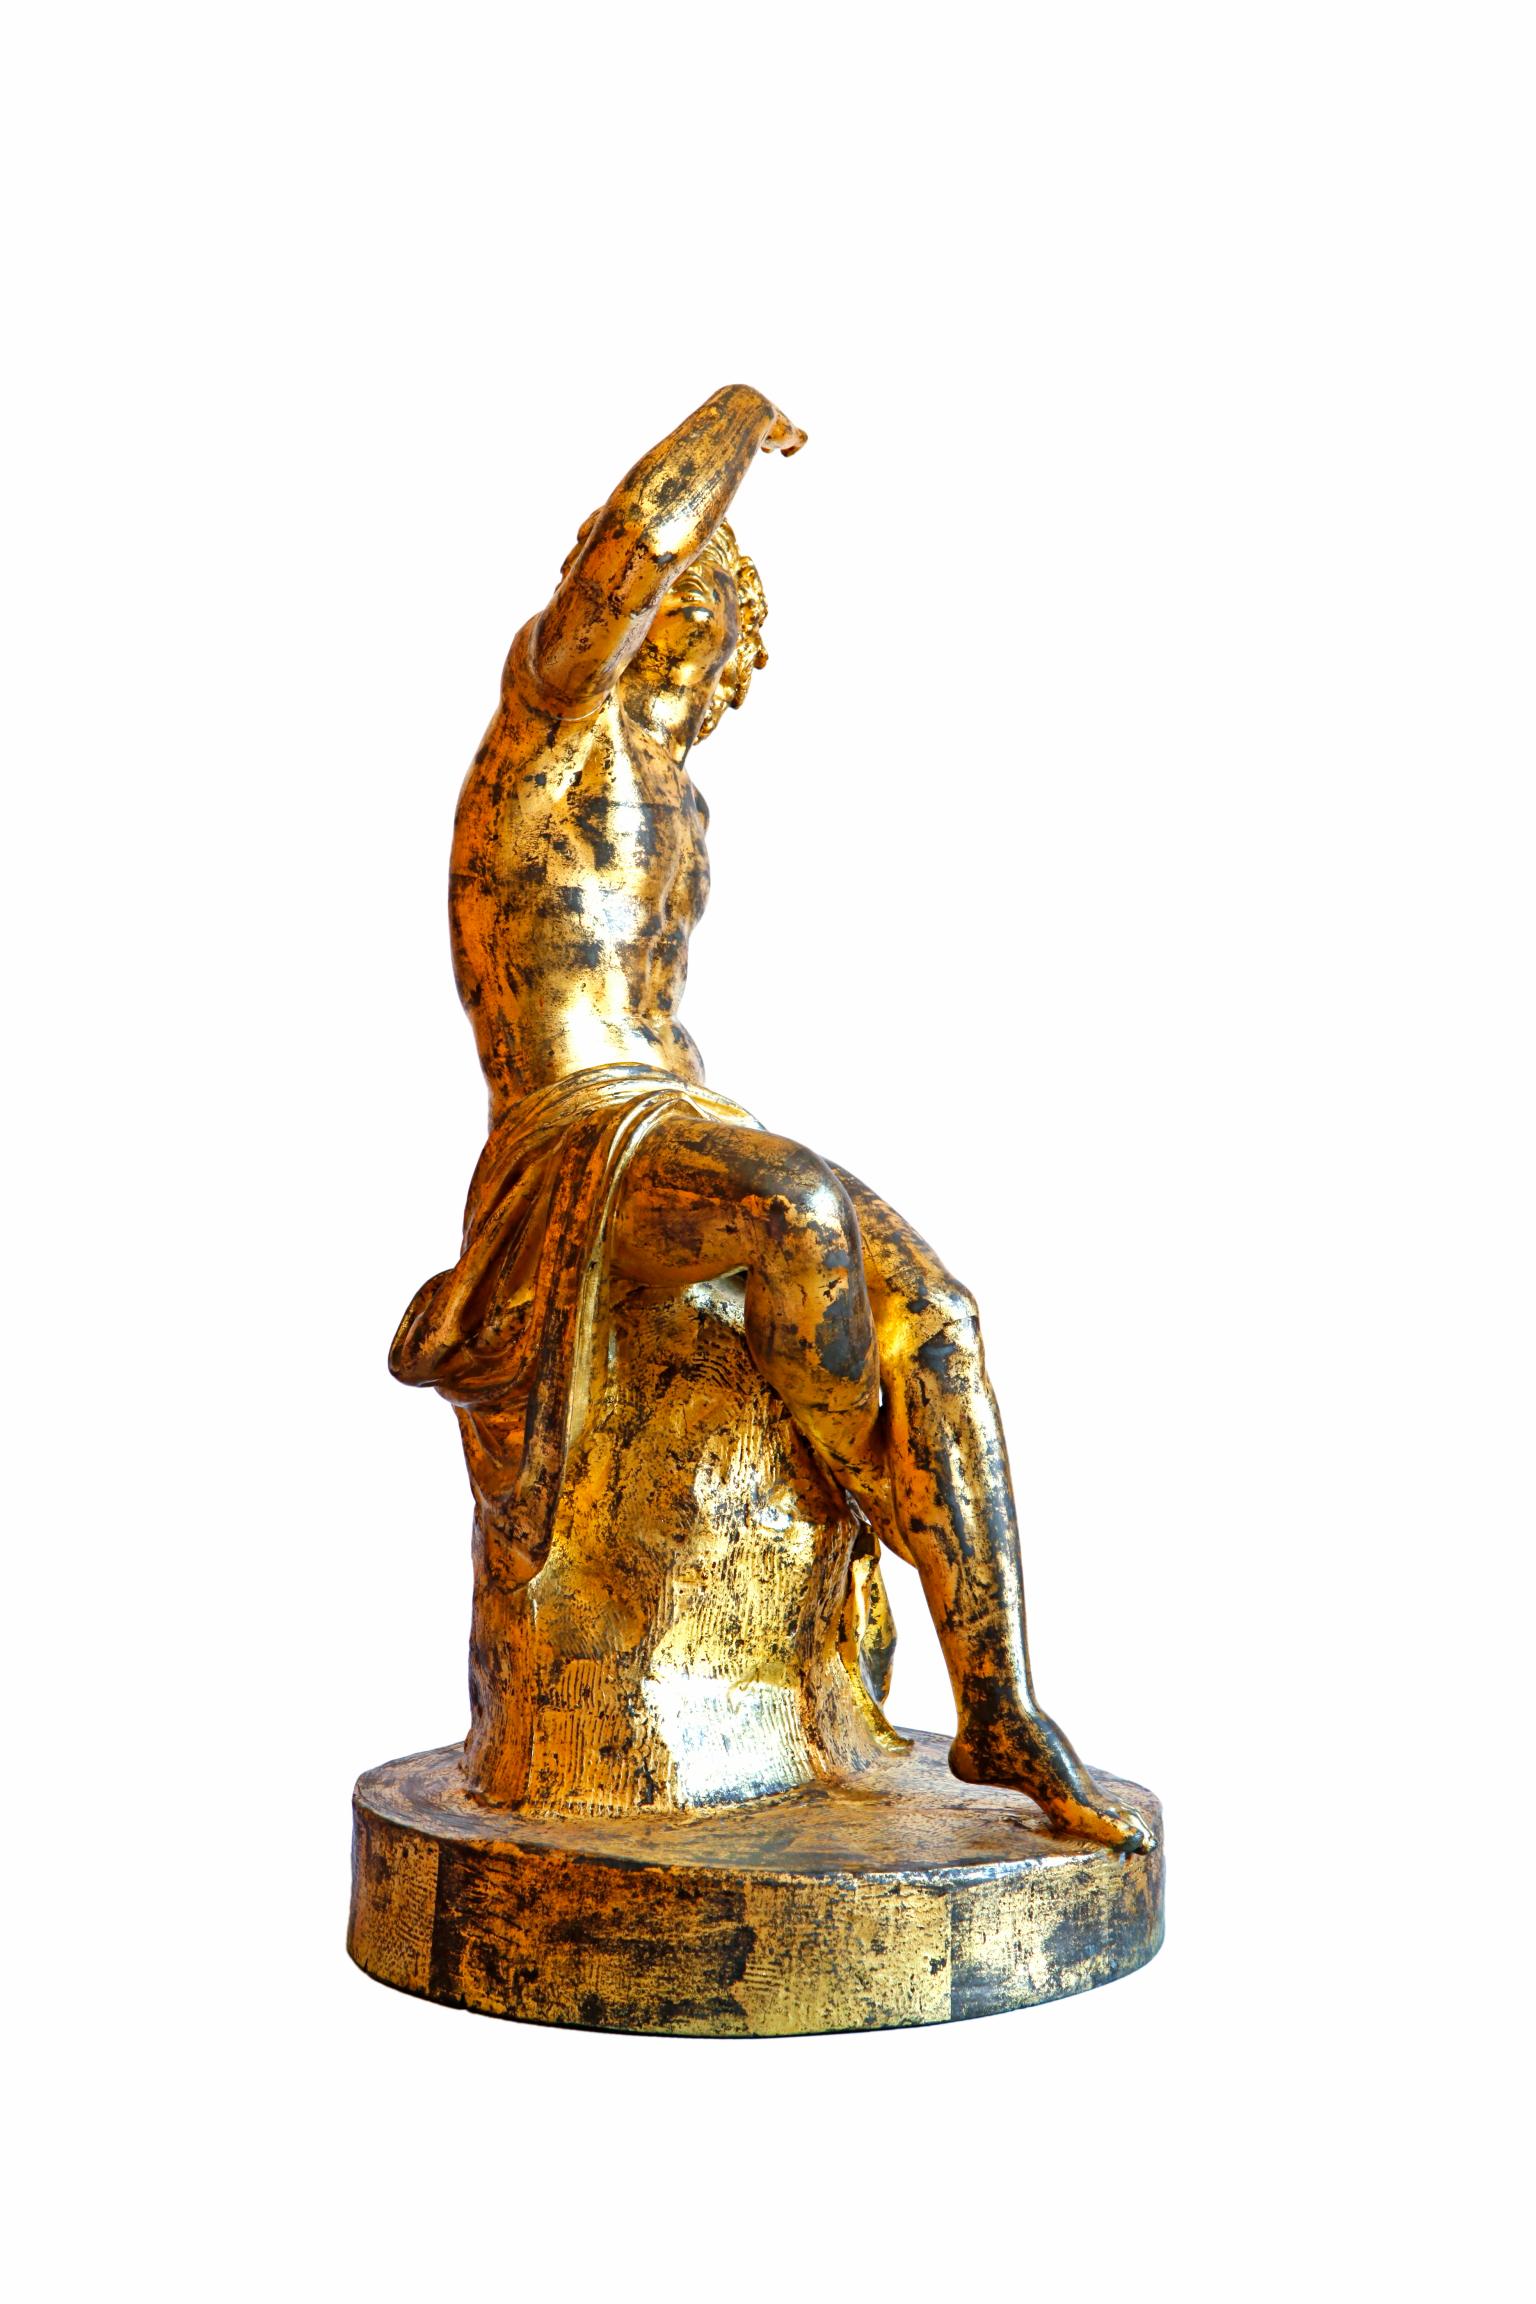 French gilt zinc figure of Bacchus modelled as seated on a tree trunk with one raised arm. On an oval plinth.